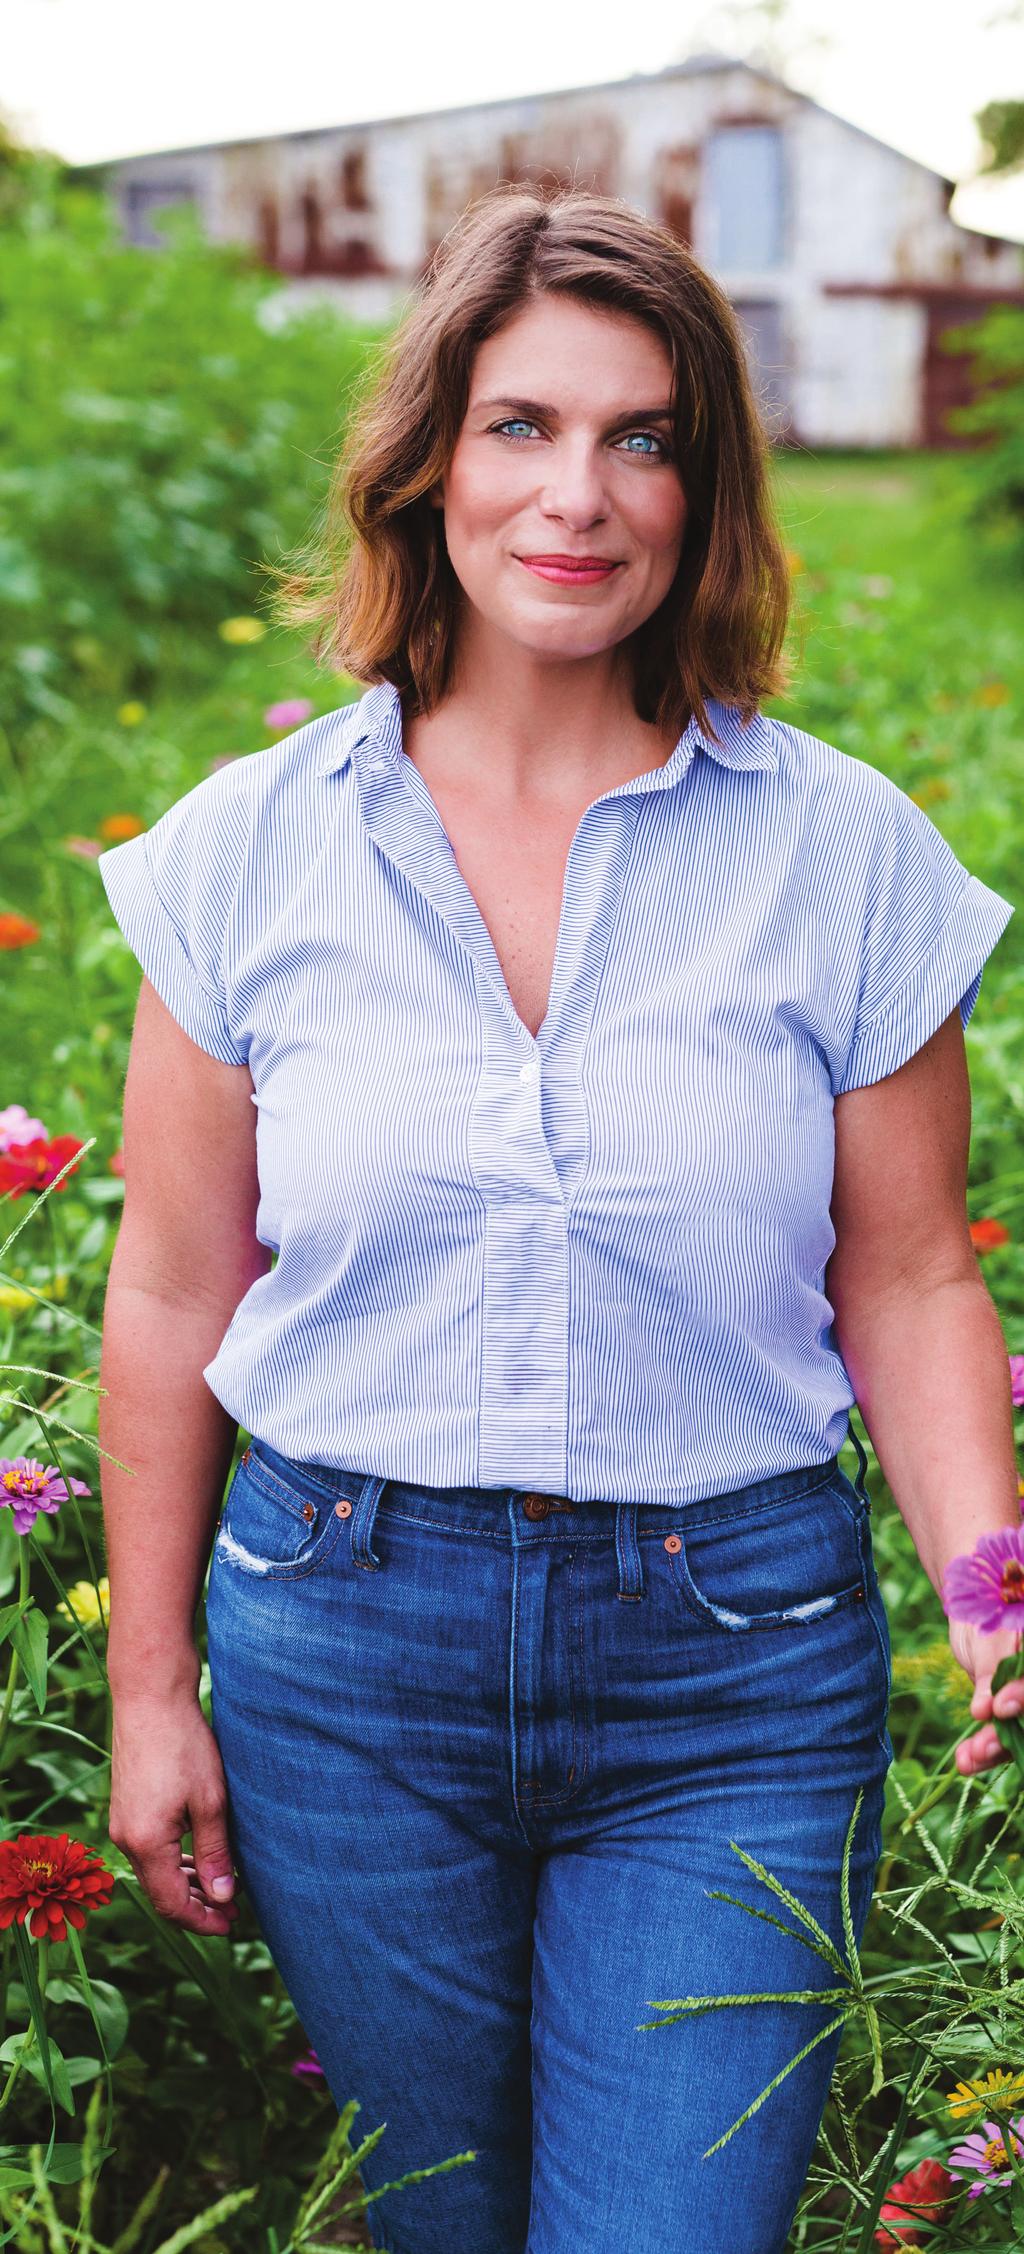 ABOUT VIVIAN Born in Deep Run, NC to tobacco and hog farming parents, Vivian Howard learned early on to appreciate the ebb and flow of eating with the seasons.